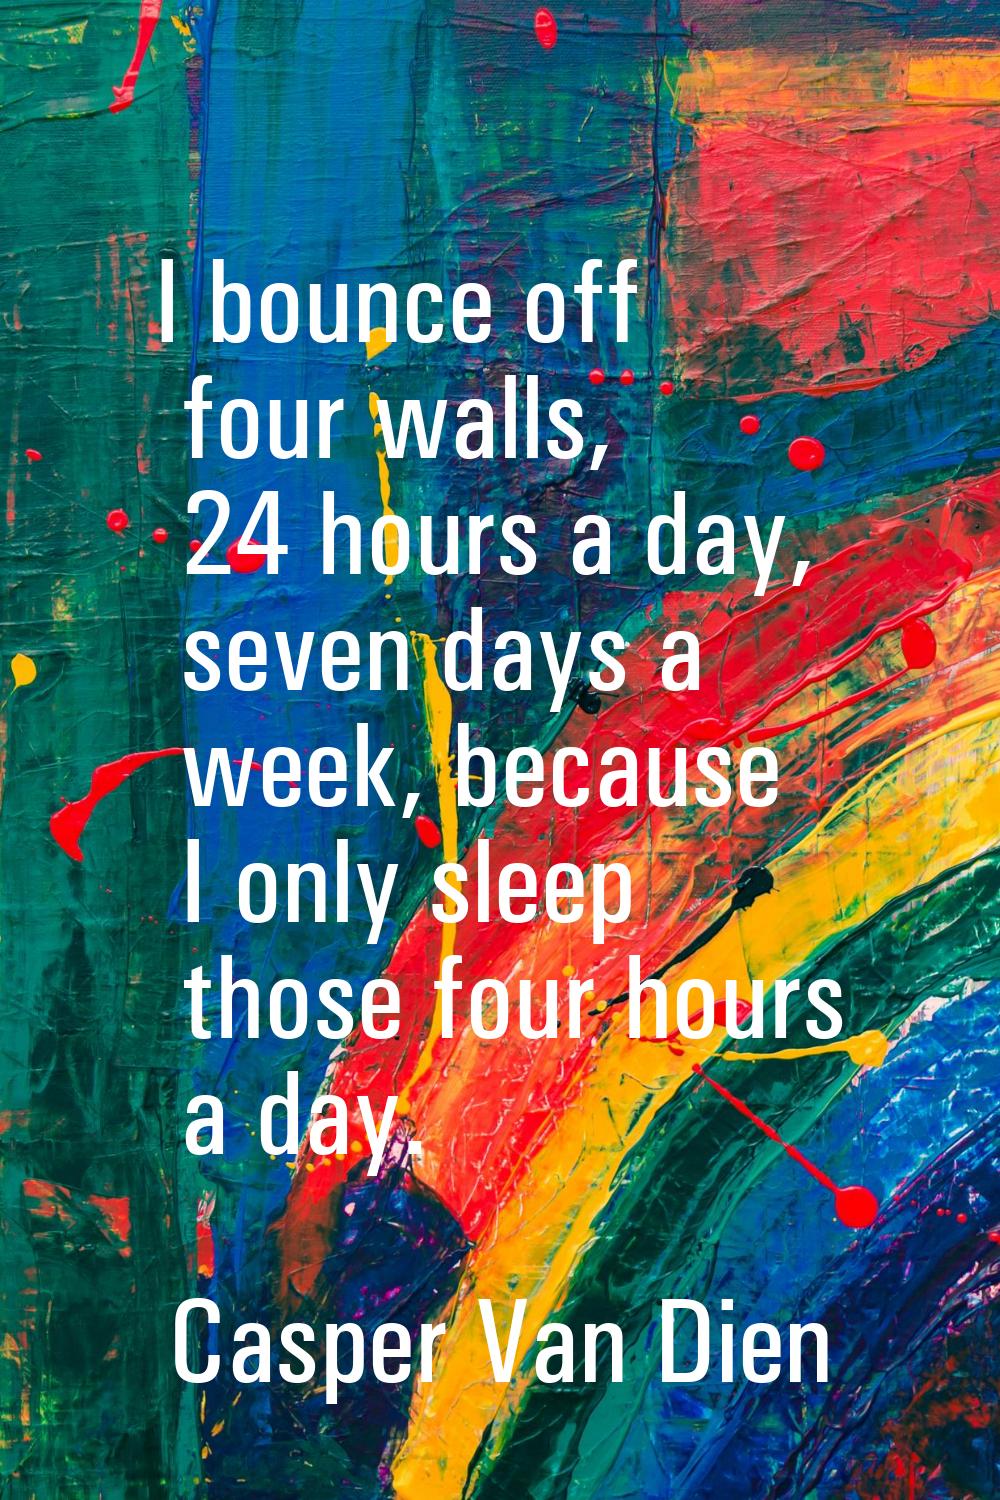 I bounce off four walls, 24 hours a day, seven days a week, because I only sleep those four hours a